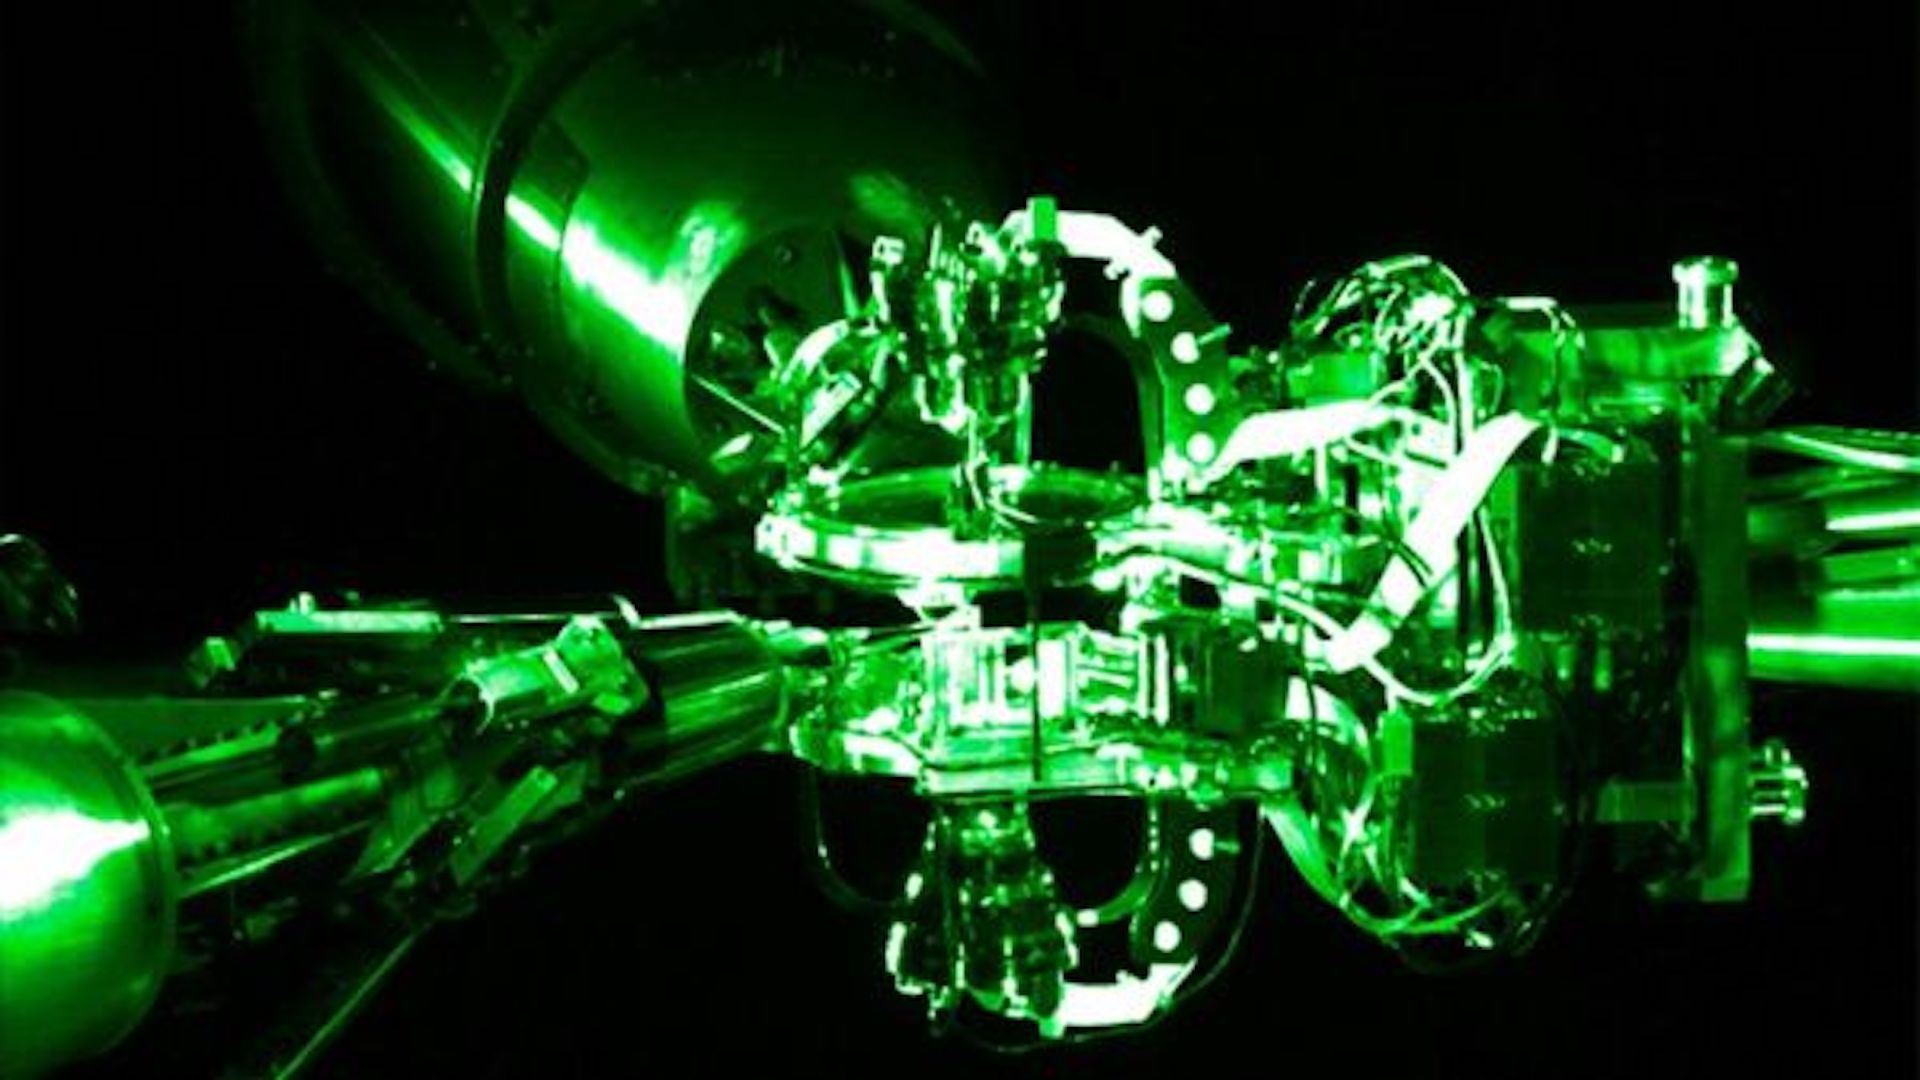 Nuclear fusion reactor 'breakthrough' is significant, but light-years away from being useful